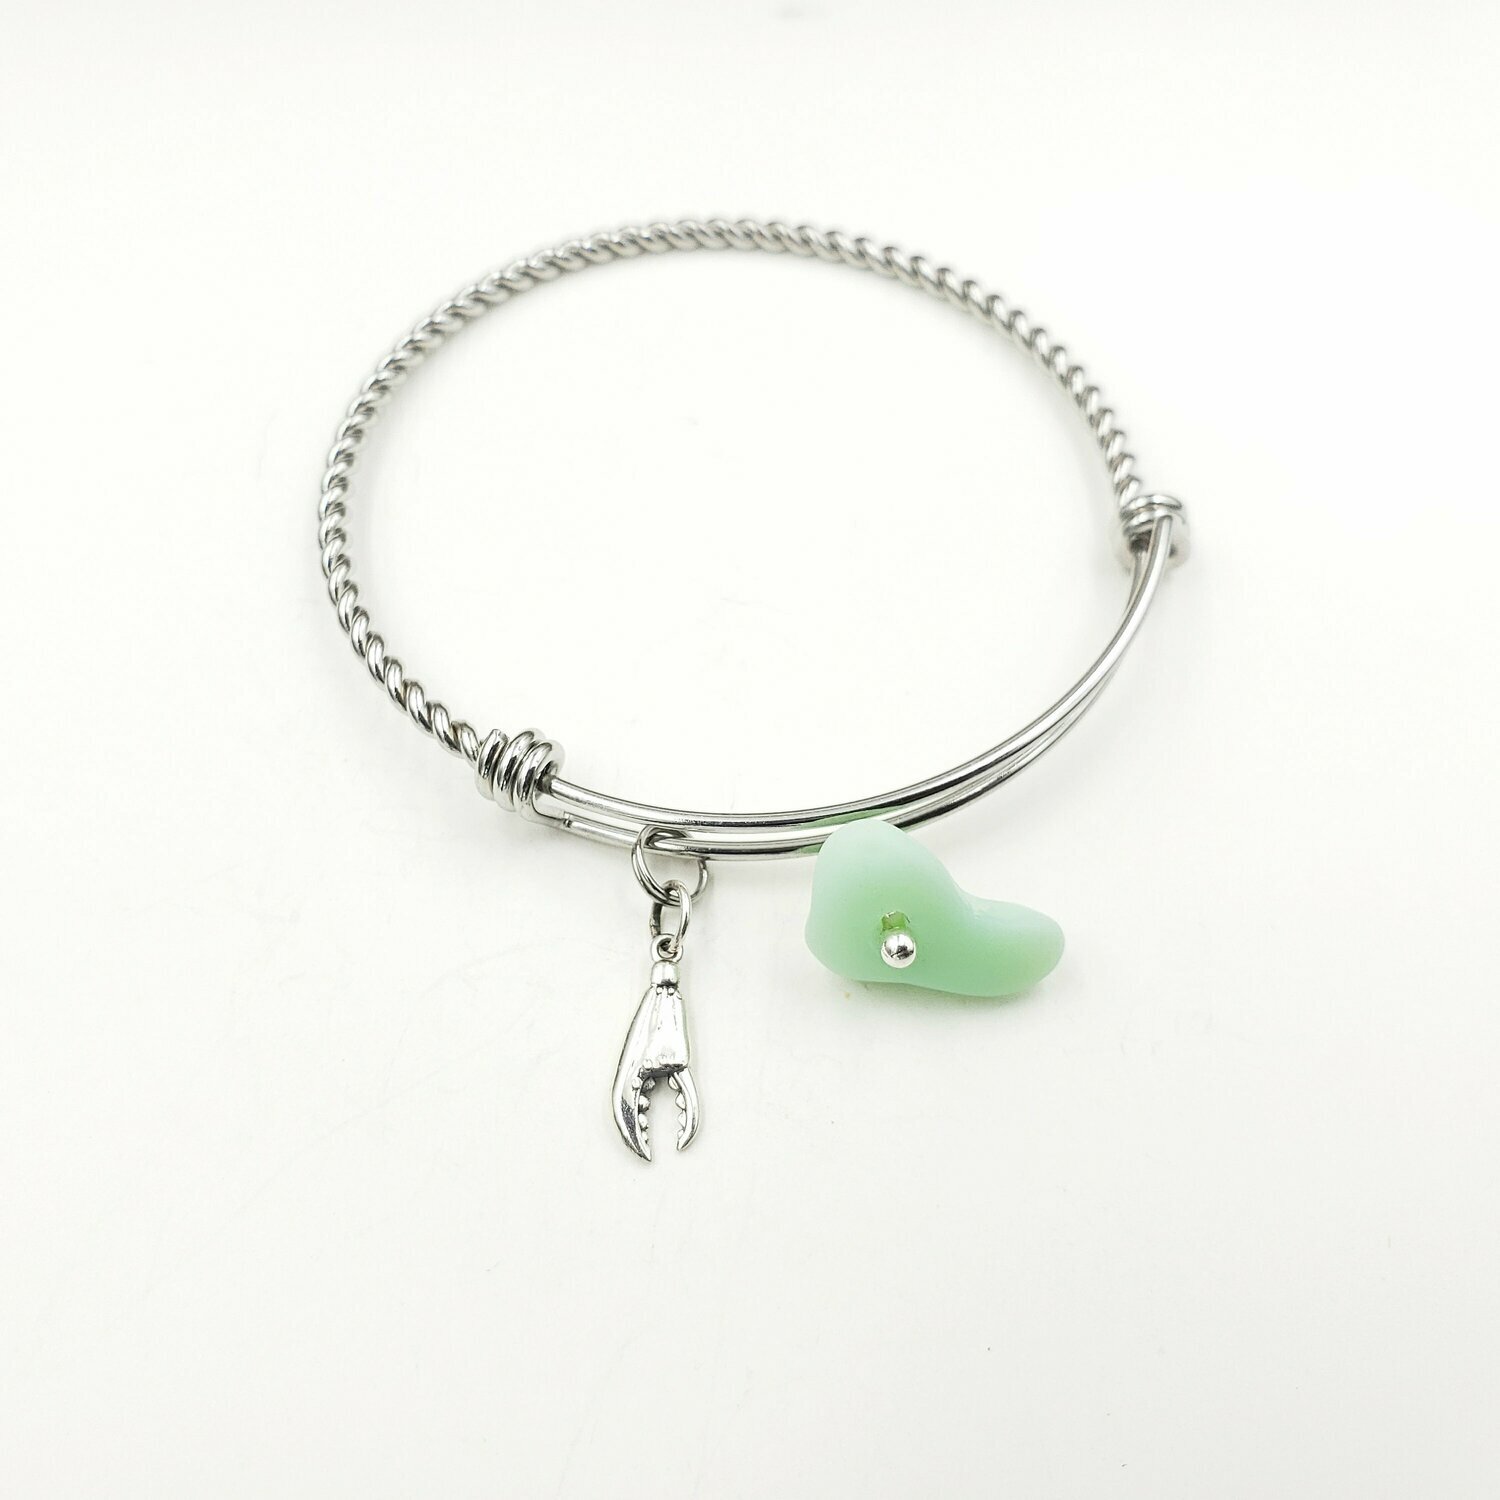 Bangle Bracelet with Crab/Lobster Claw Charm and Jadeite Lake Erie Beach Glass